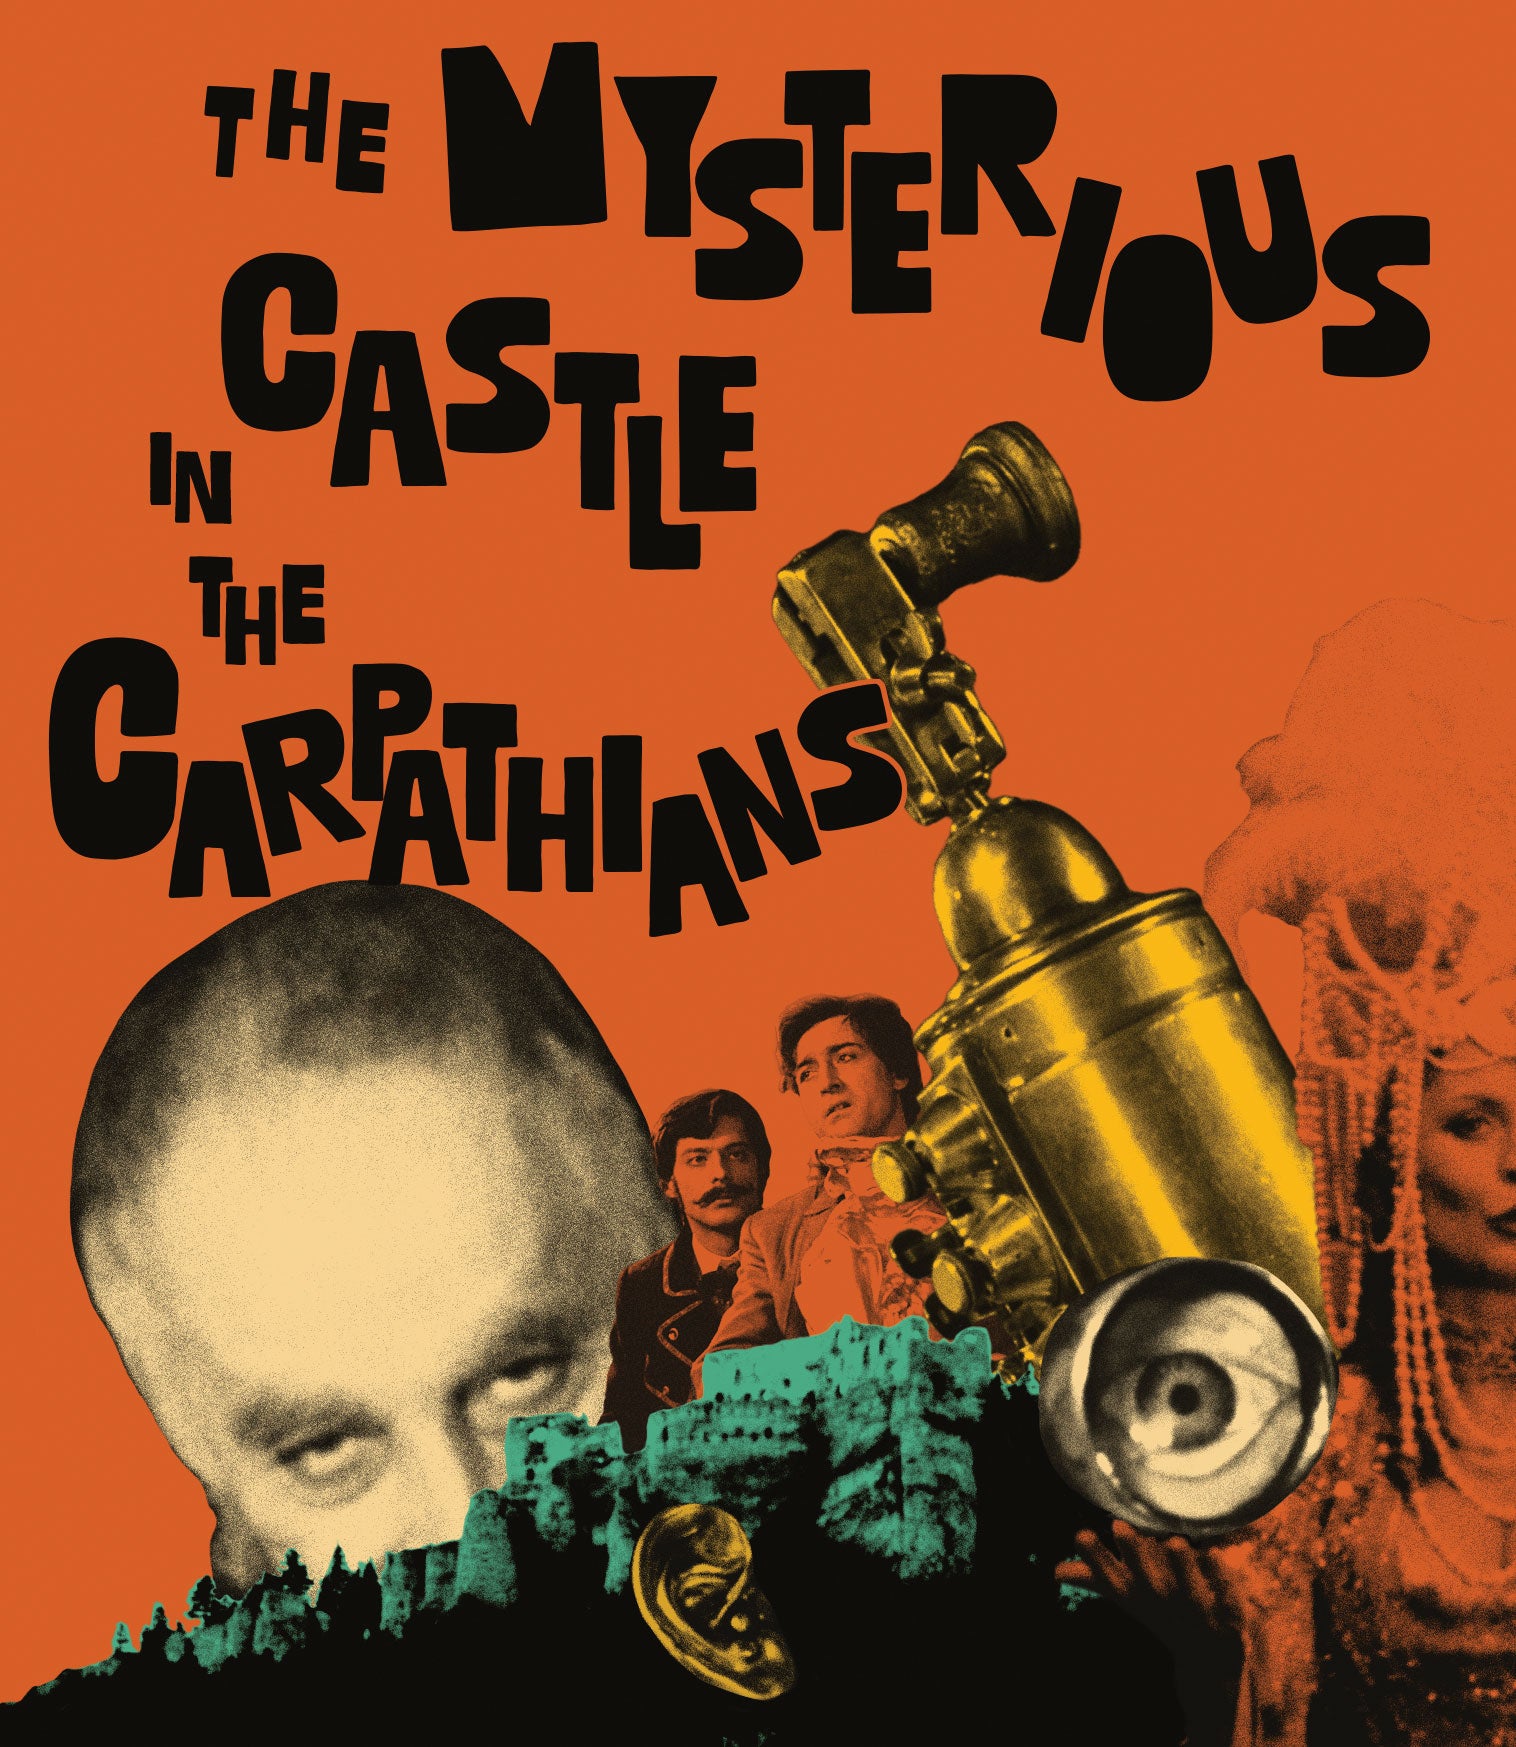 THE MYSTERIOUS CASTLE IN THE CARPATHIANS BLU-RAY